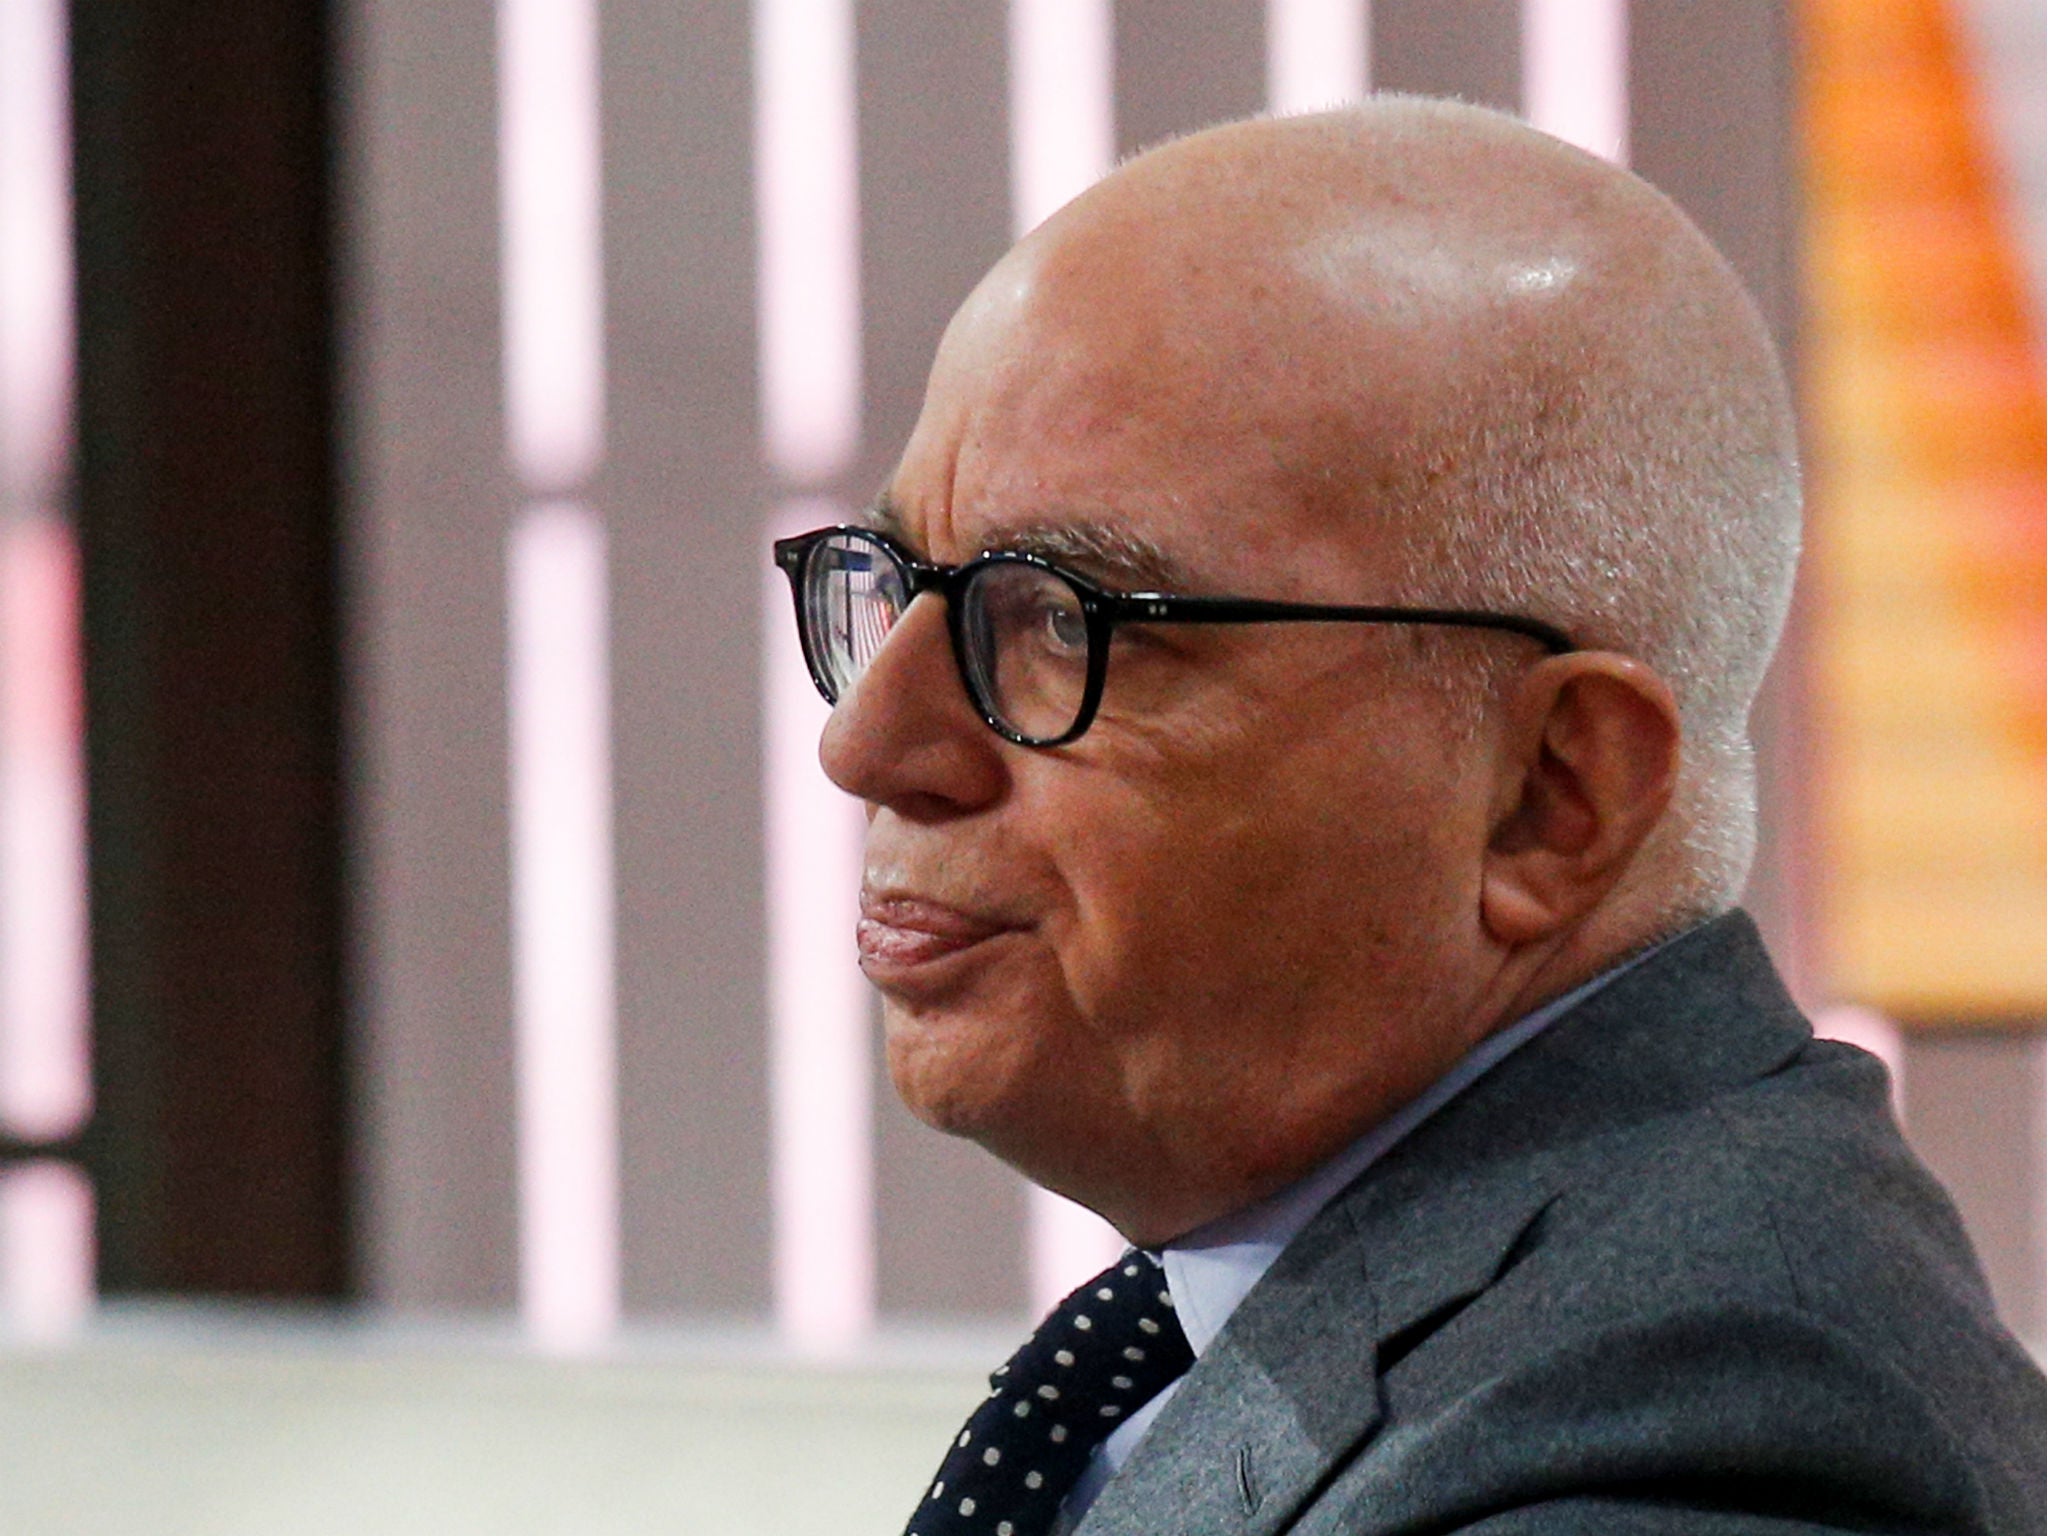 Michael Wolff is seen on the set of NBC's 'Today' show prior to an interview about his book